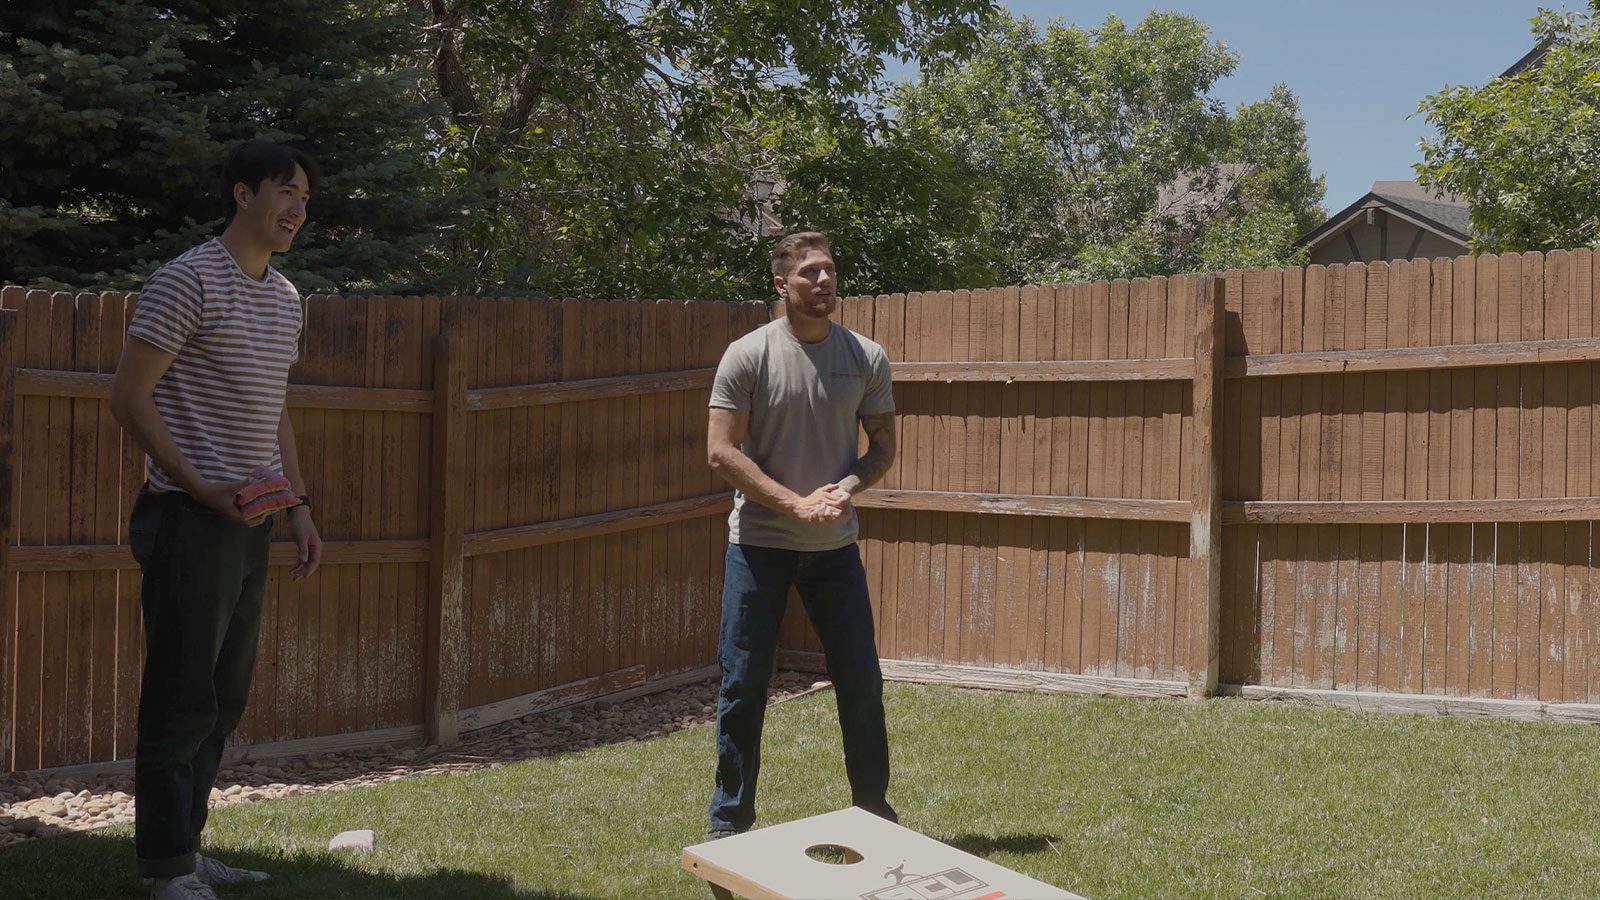 Two men playing a bean bag toss game in a sunny backyard with a wooden fence.